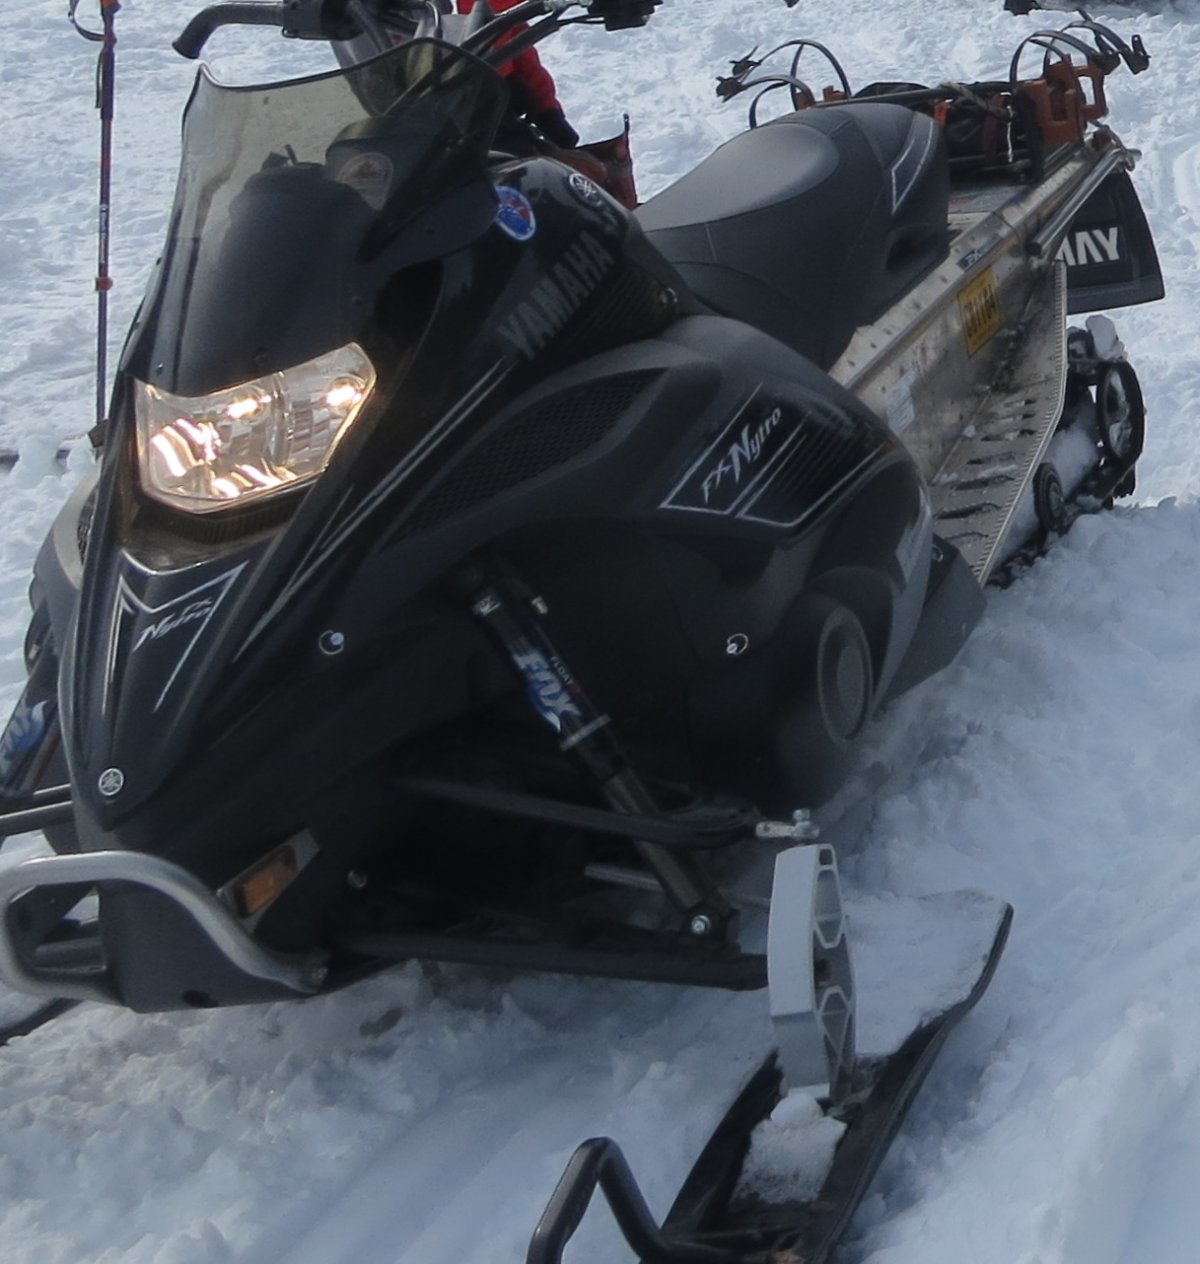 Central Hastings OPP say oner person is dead folloing a snowmoible crash north of Marmora on Feb. 3, 2022.